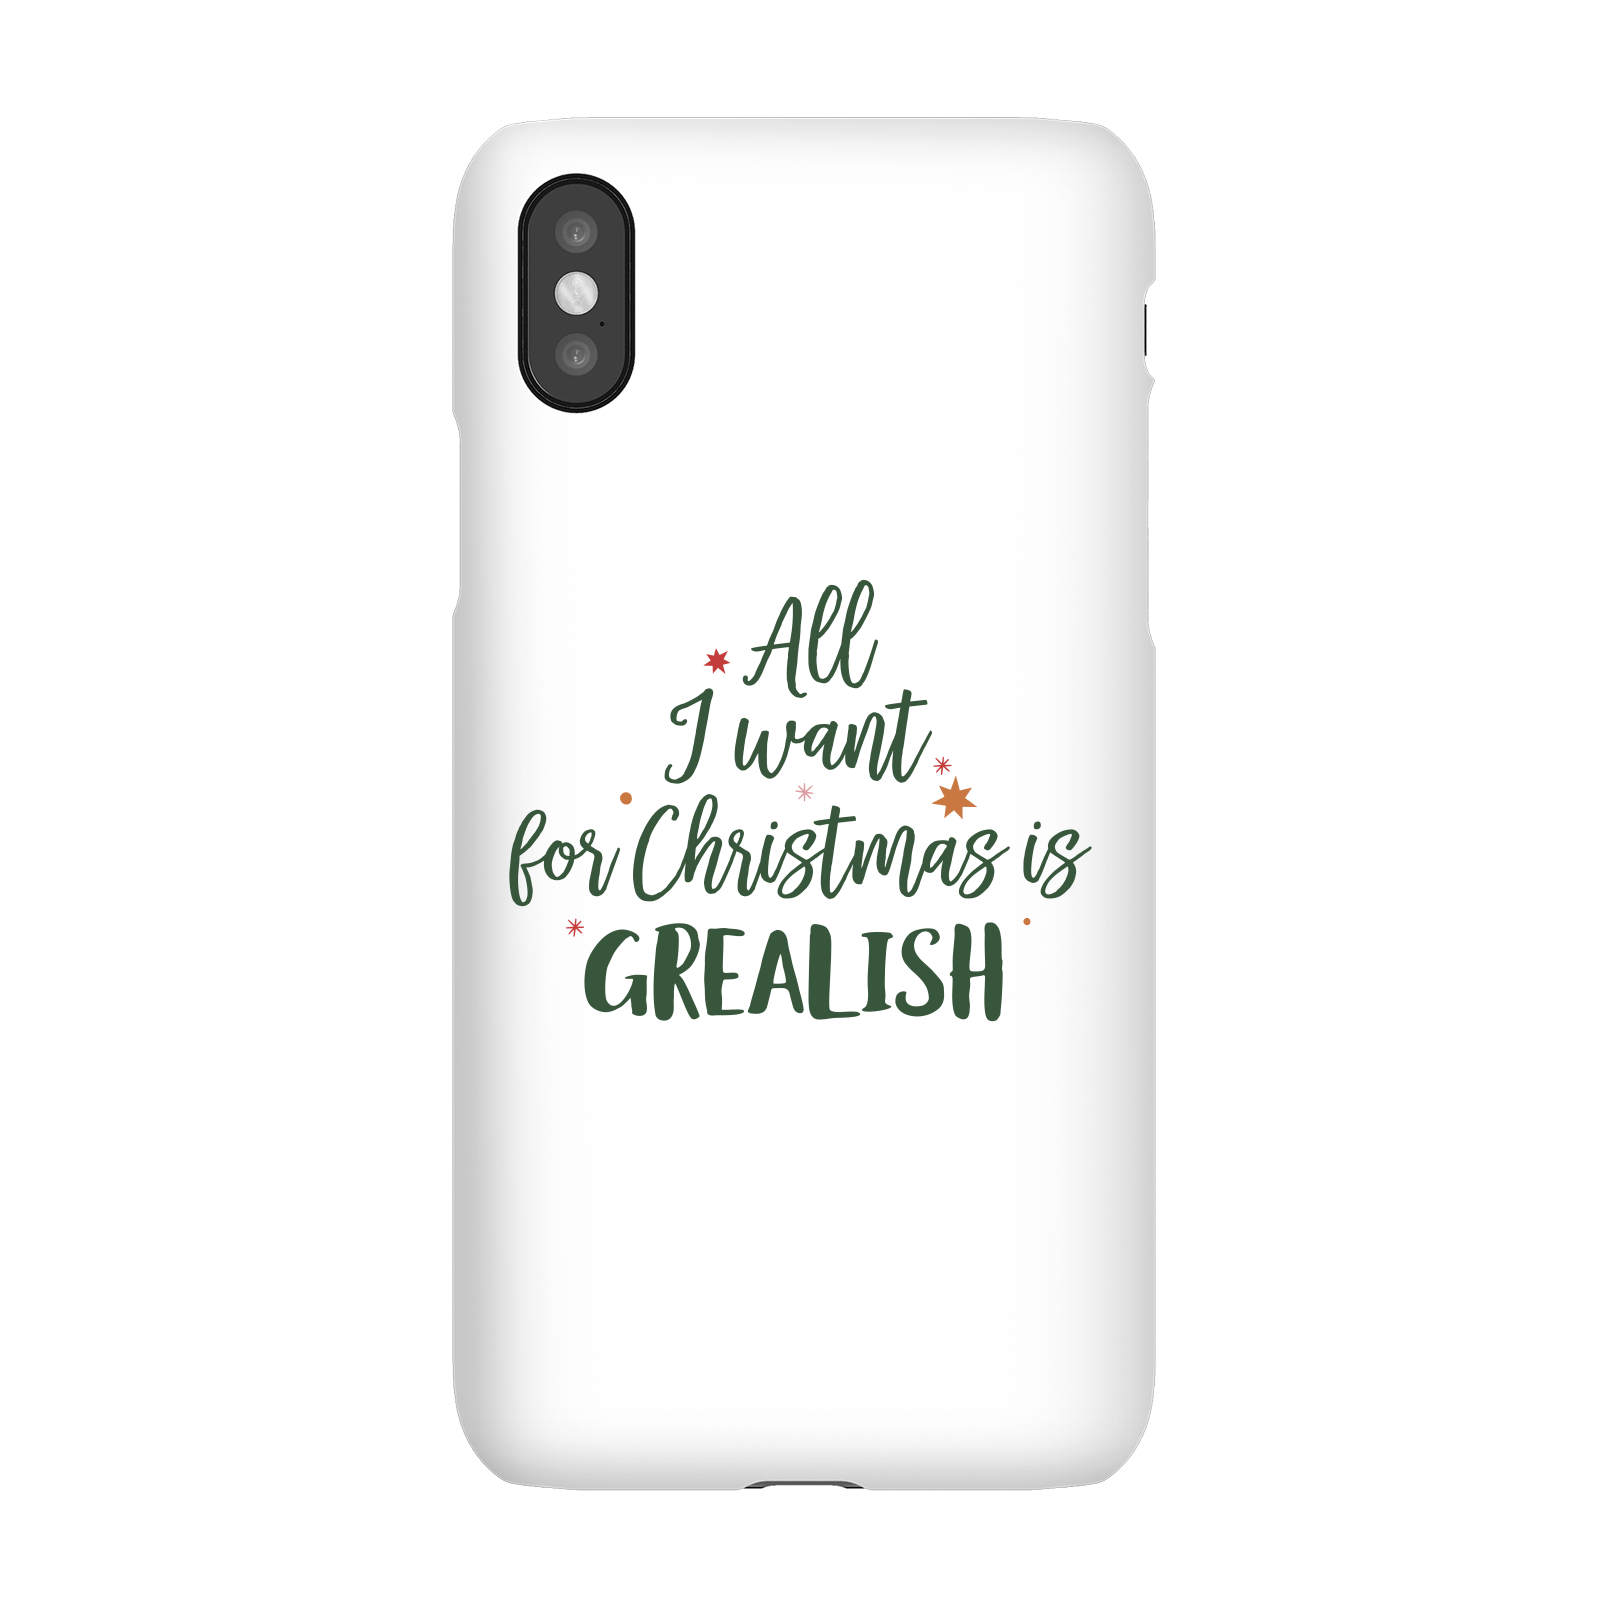 All I Want For Christmas Is Grealish Phone Case for iPhone and Android - iPhone 5/5s - Snap Case - Matte